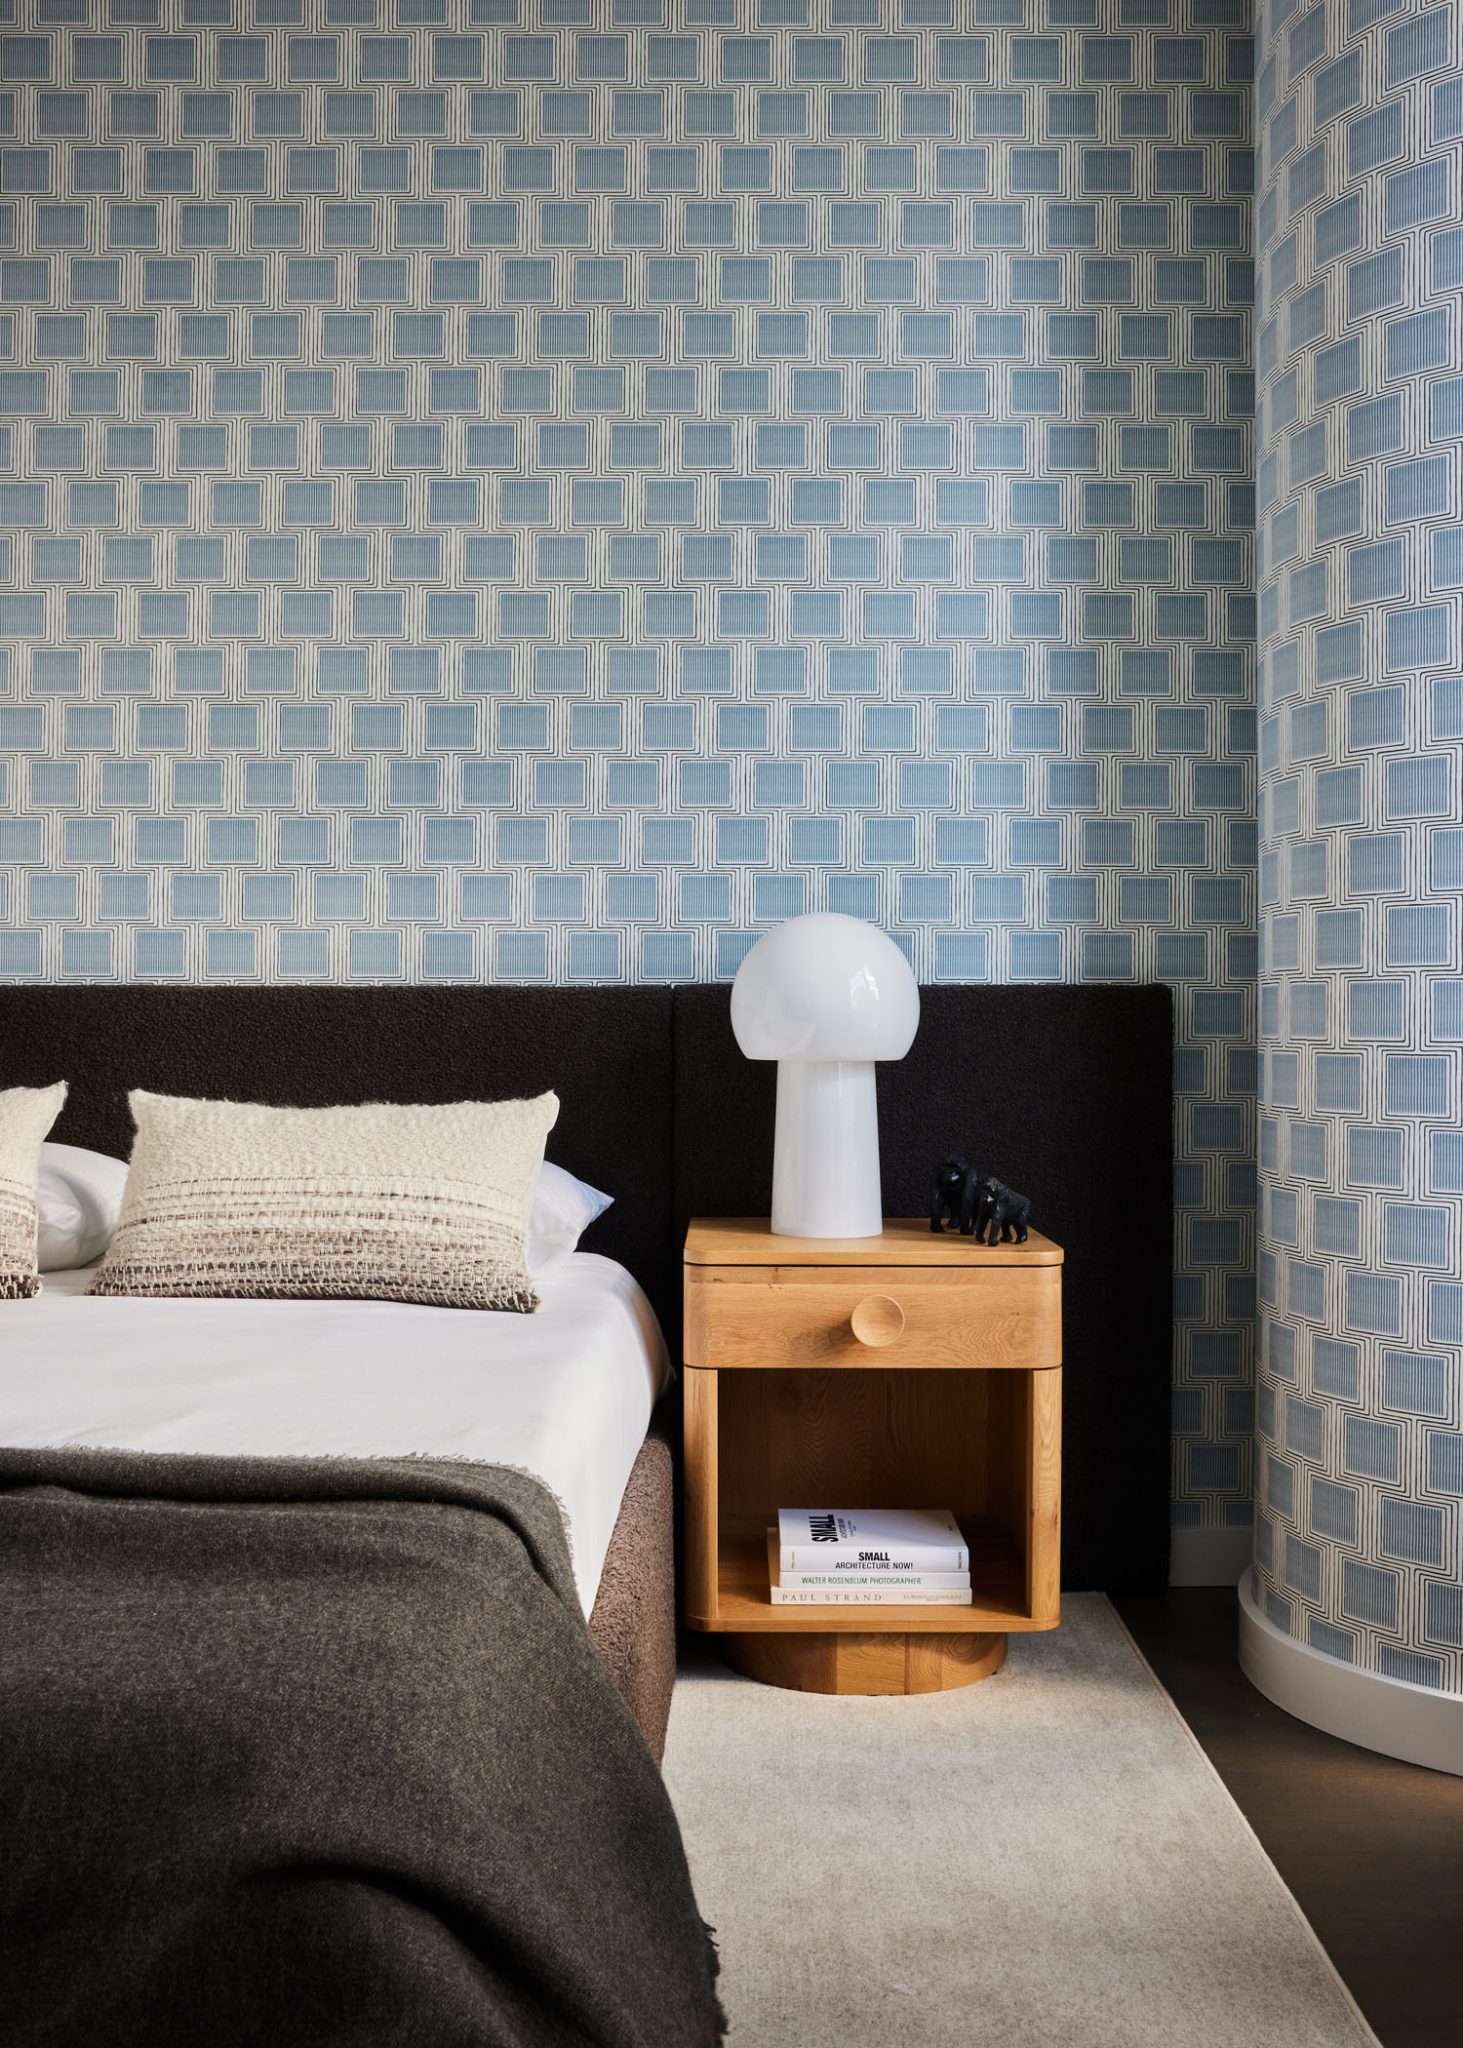 modern bedroom in neutral tones with contrasting blue and beige wallpaper